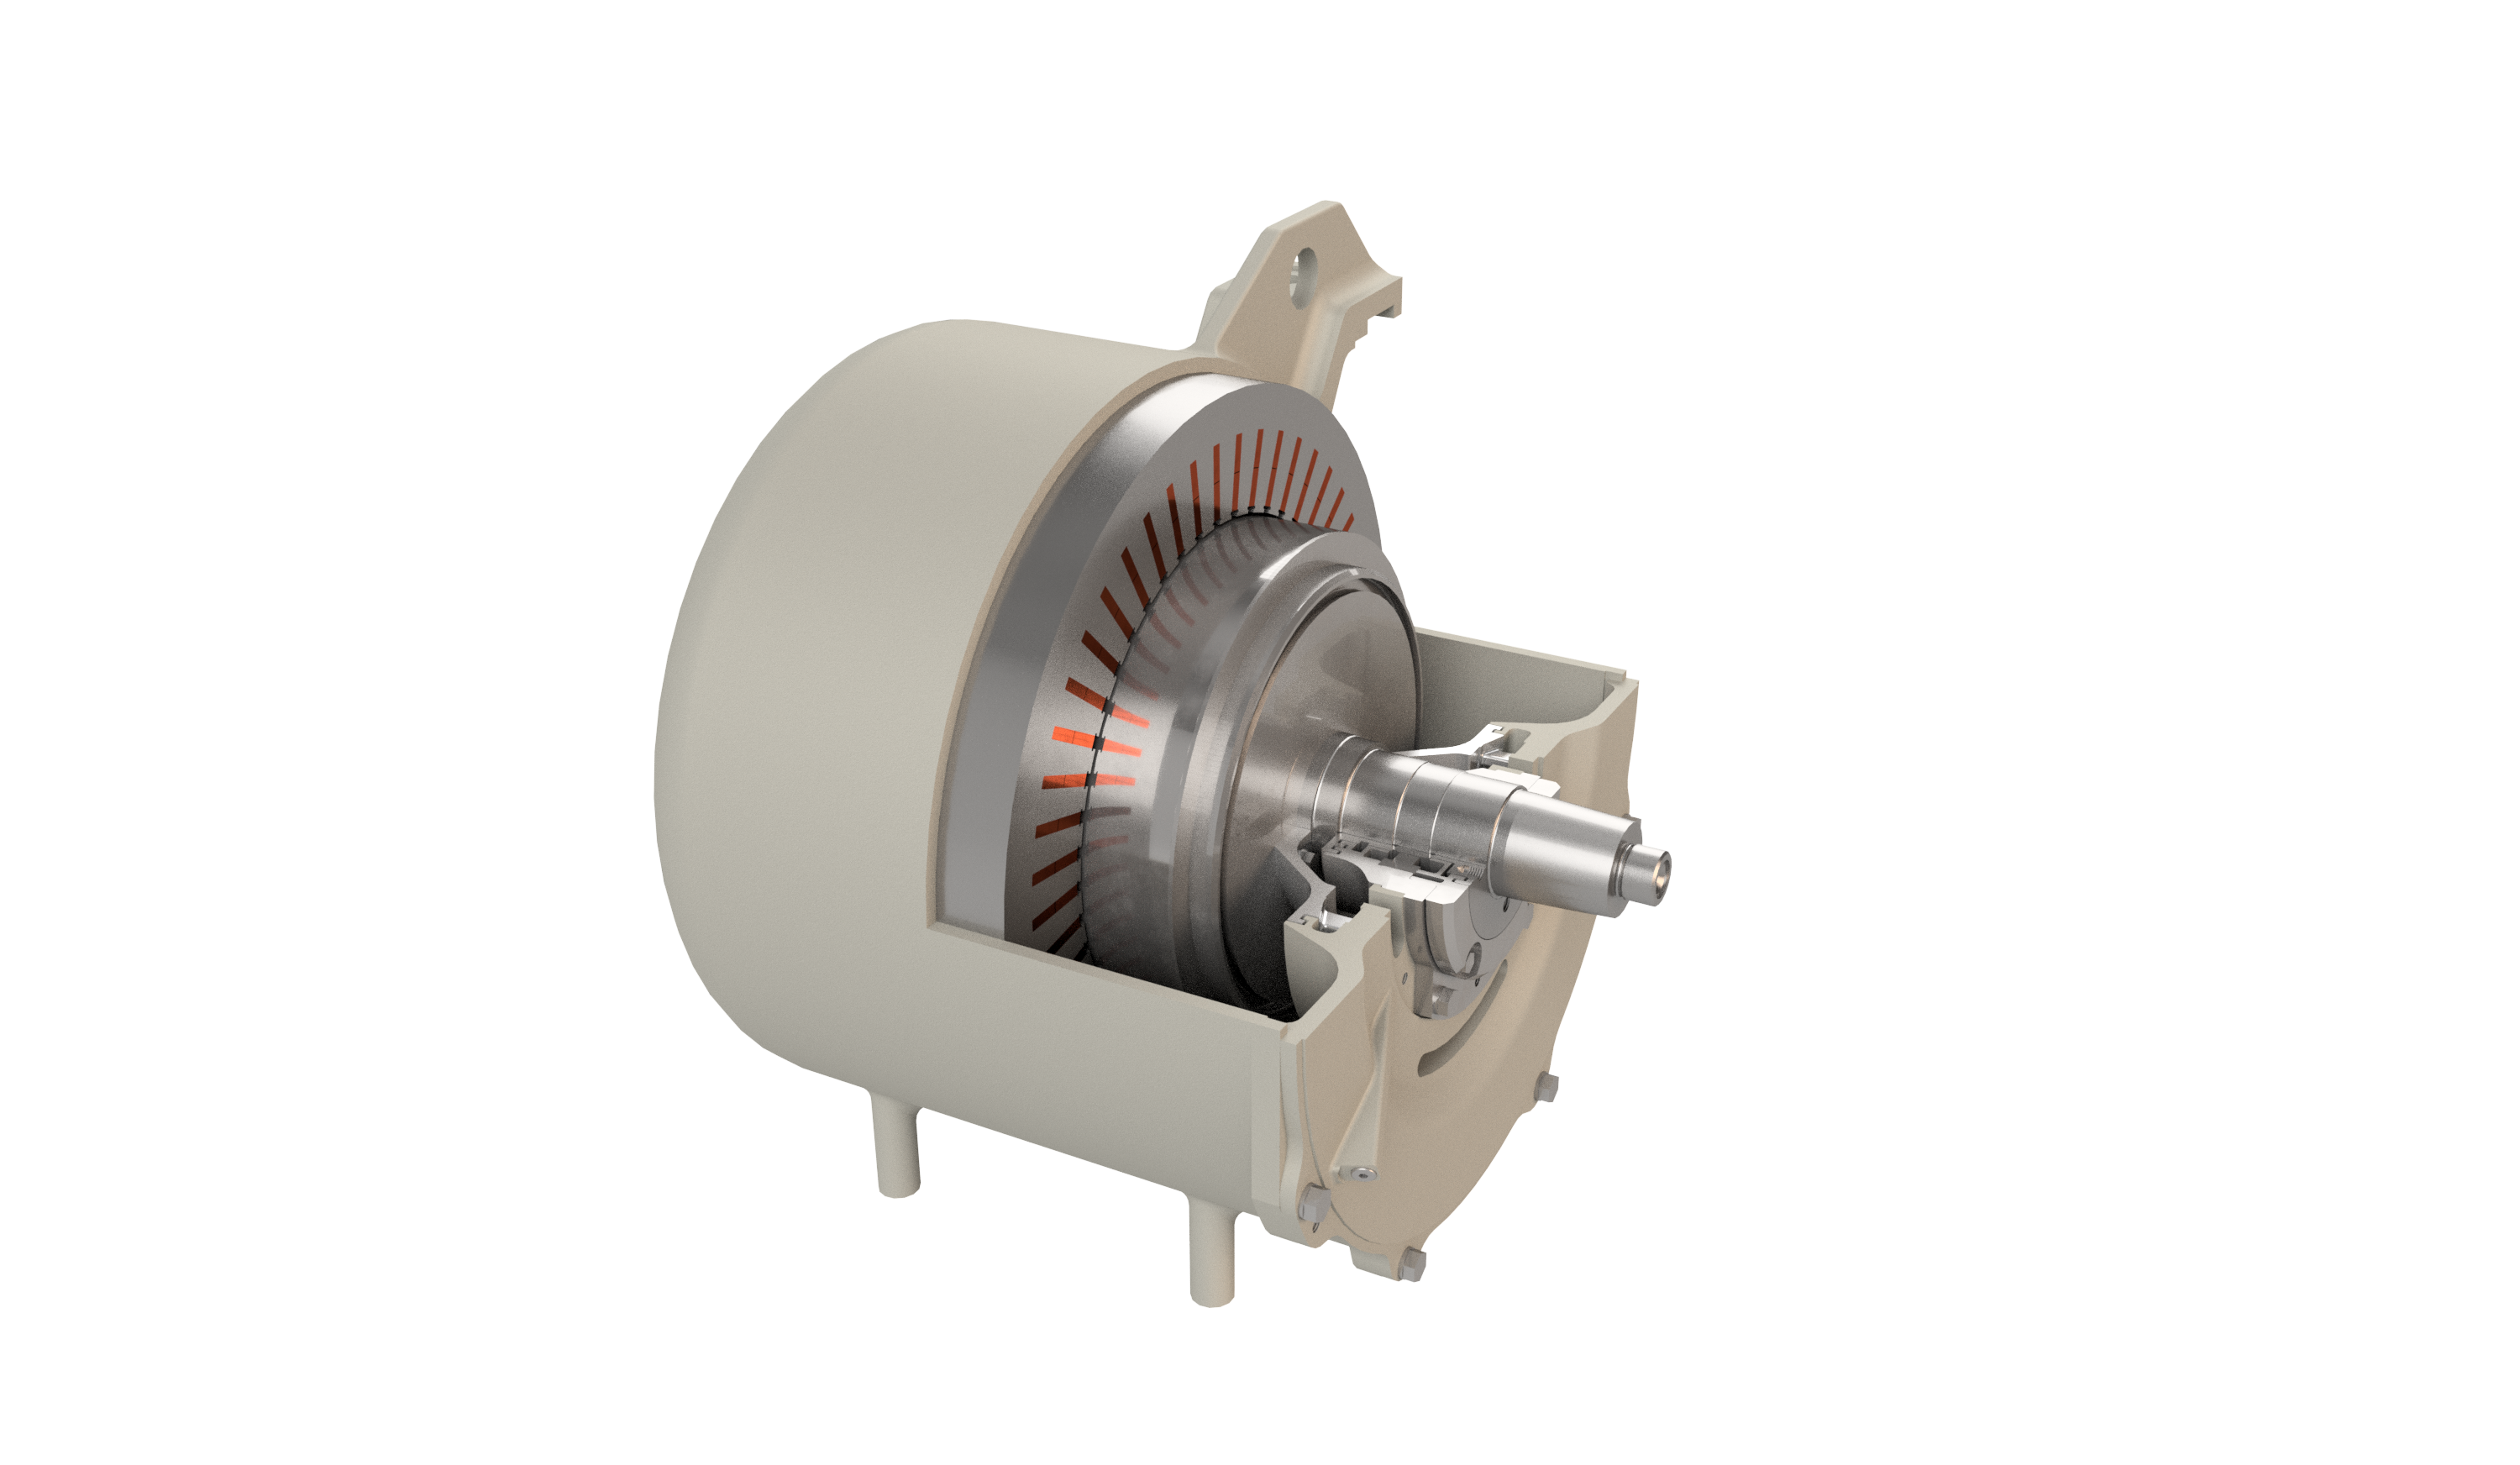 Permanent magnet synchronous motor for railway vehicles